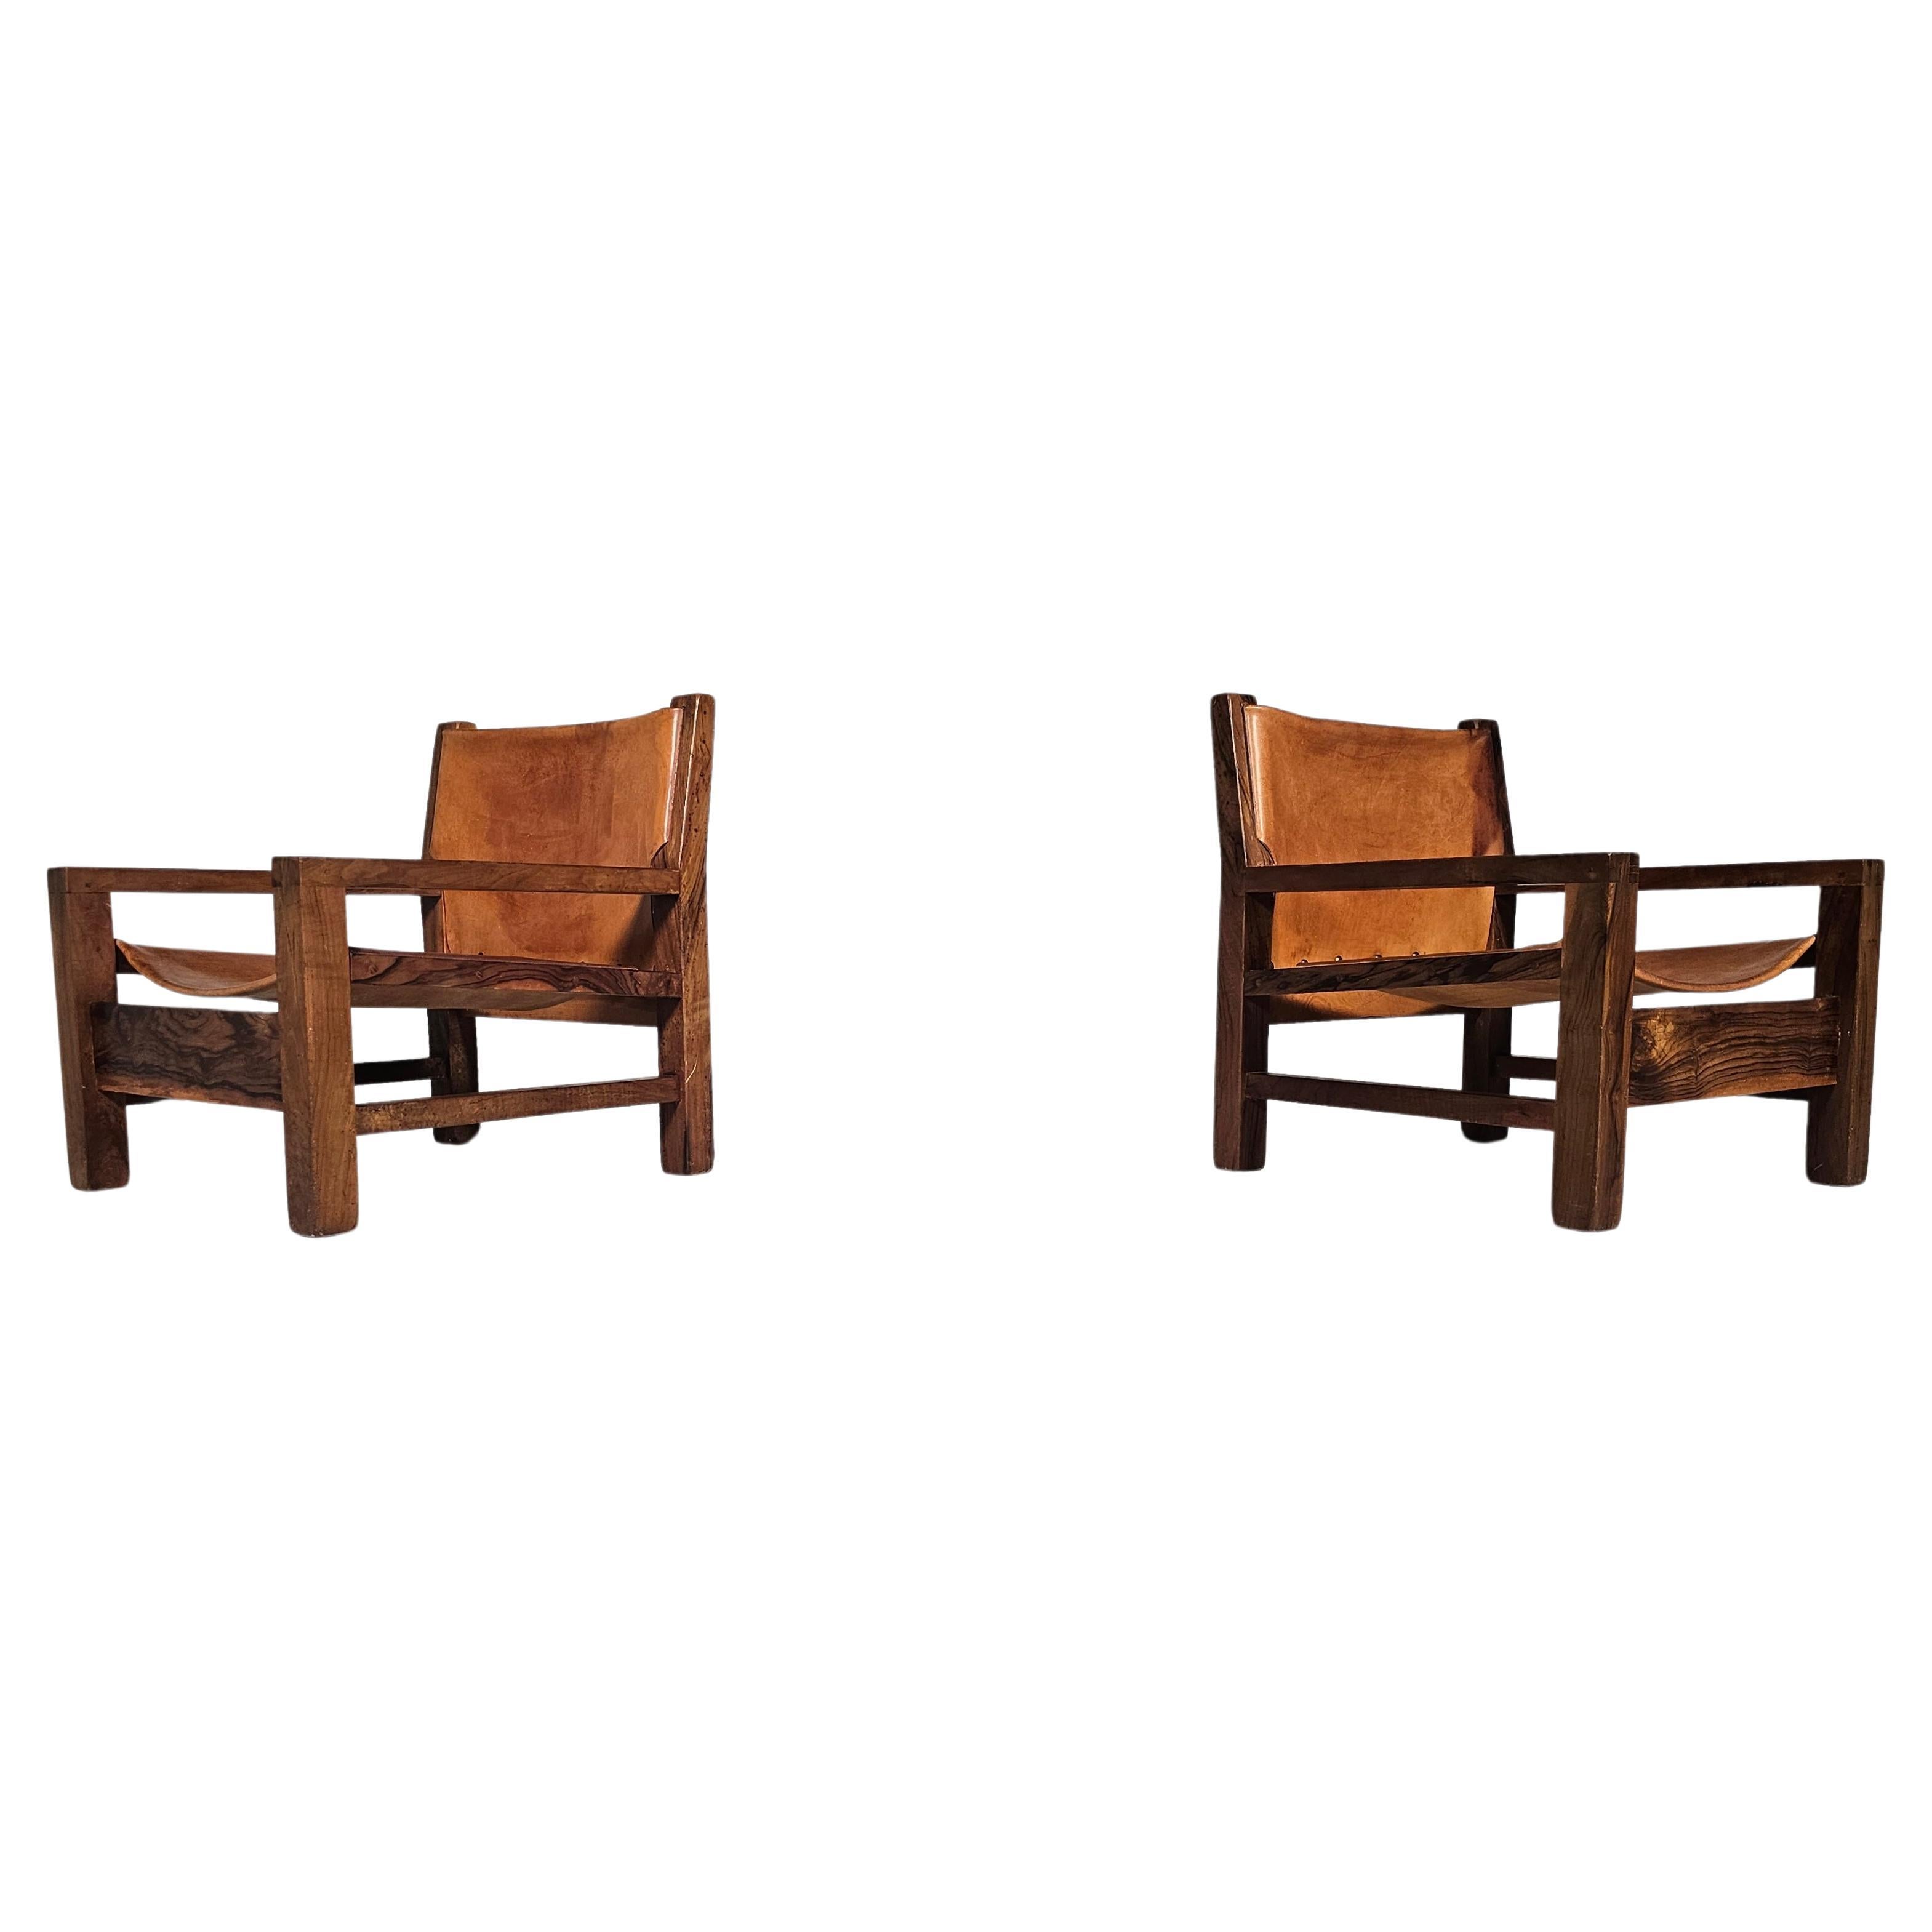 European Armchairs in cognag leather and olive wood, France, 1970s For Sale